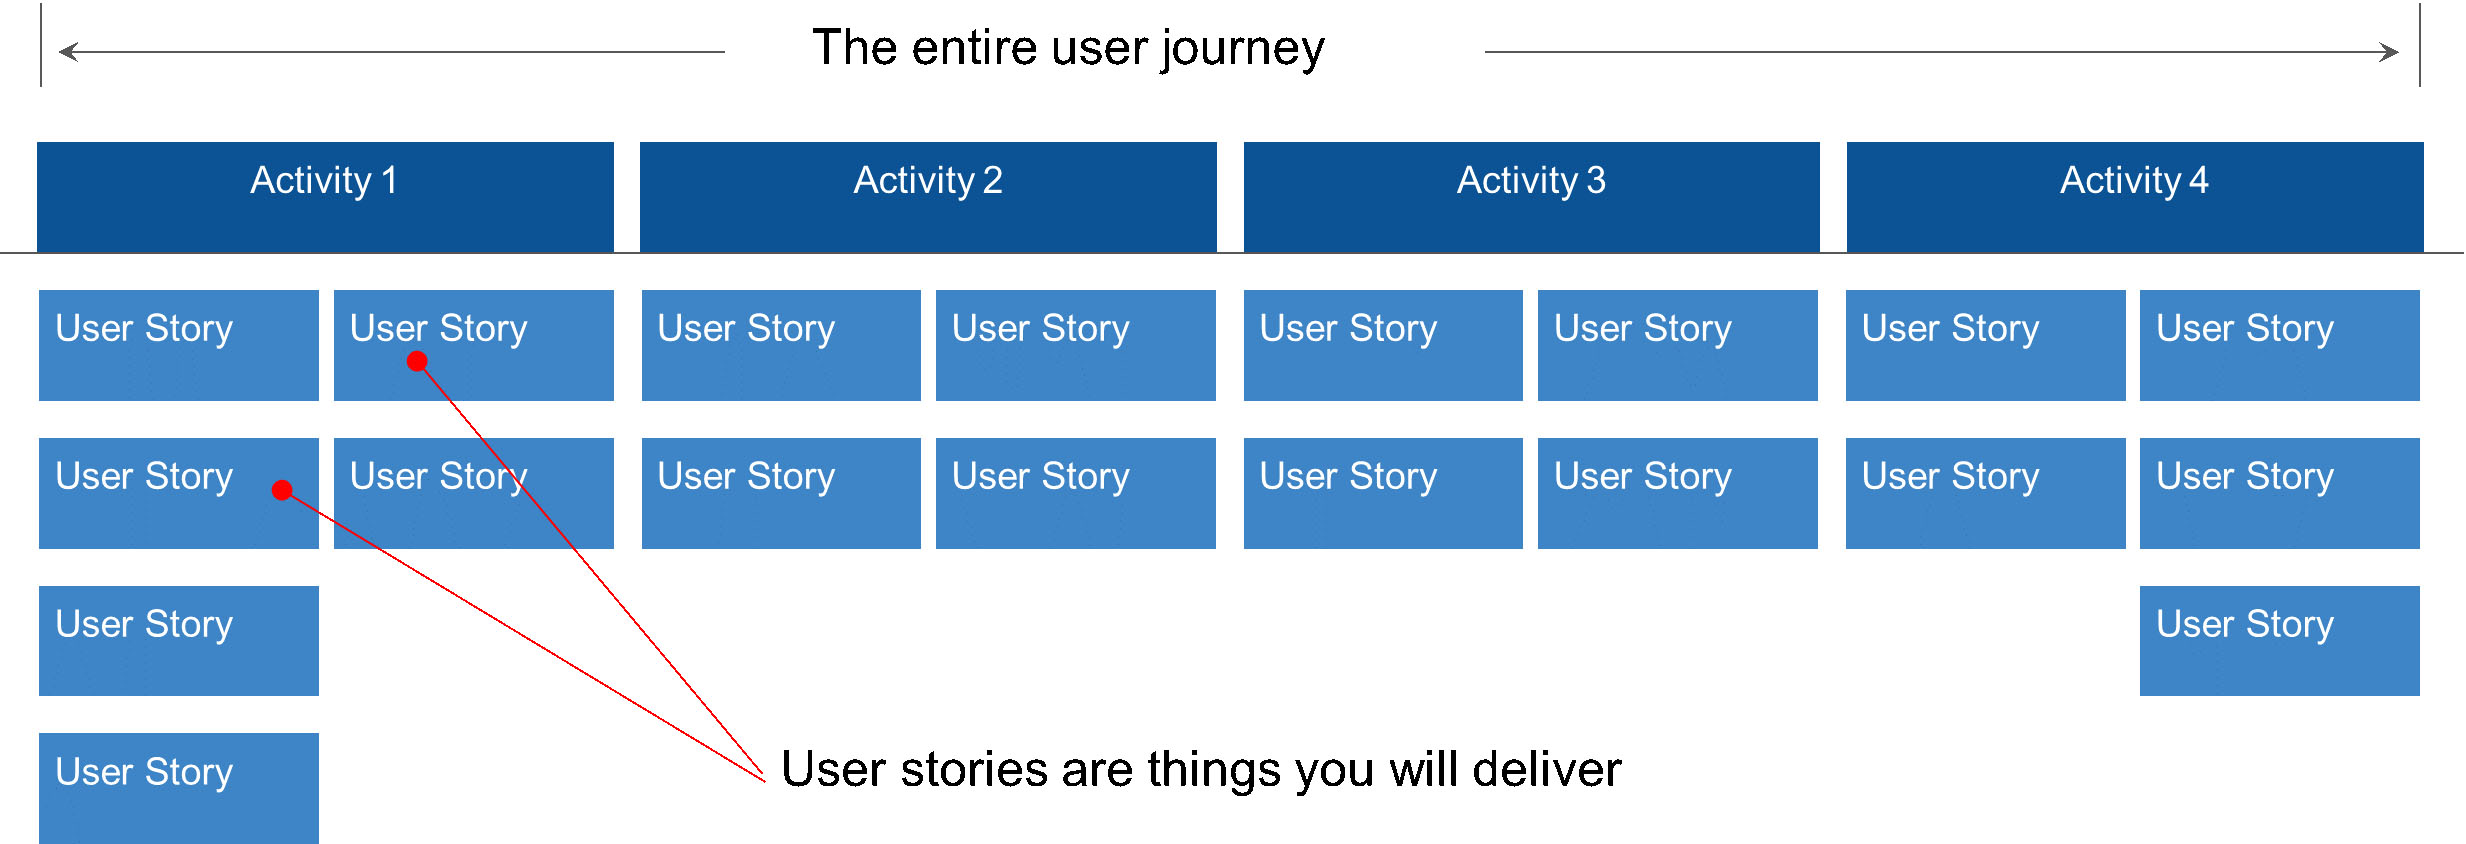 Story map for entire user journey